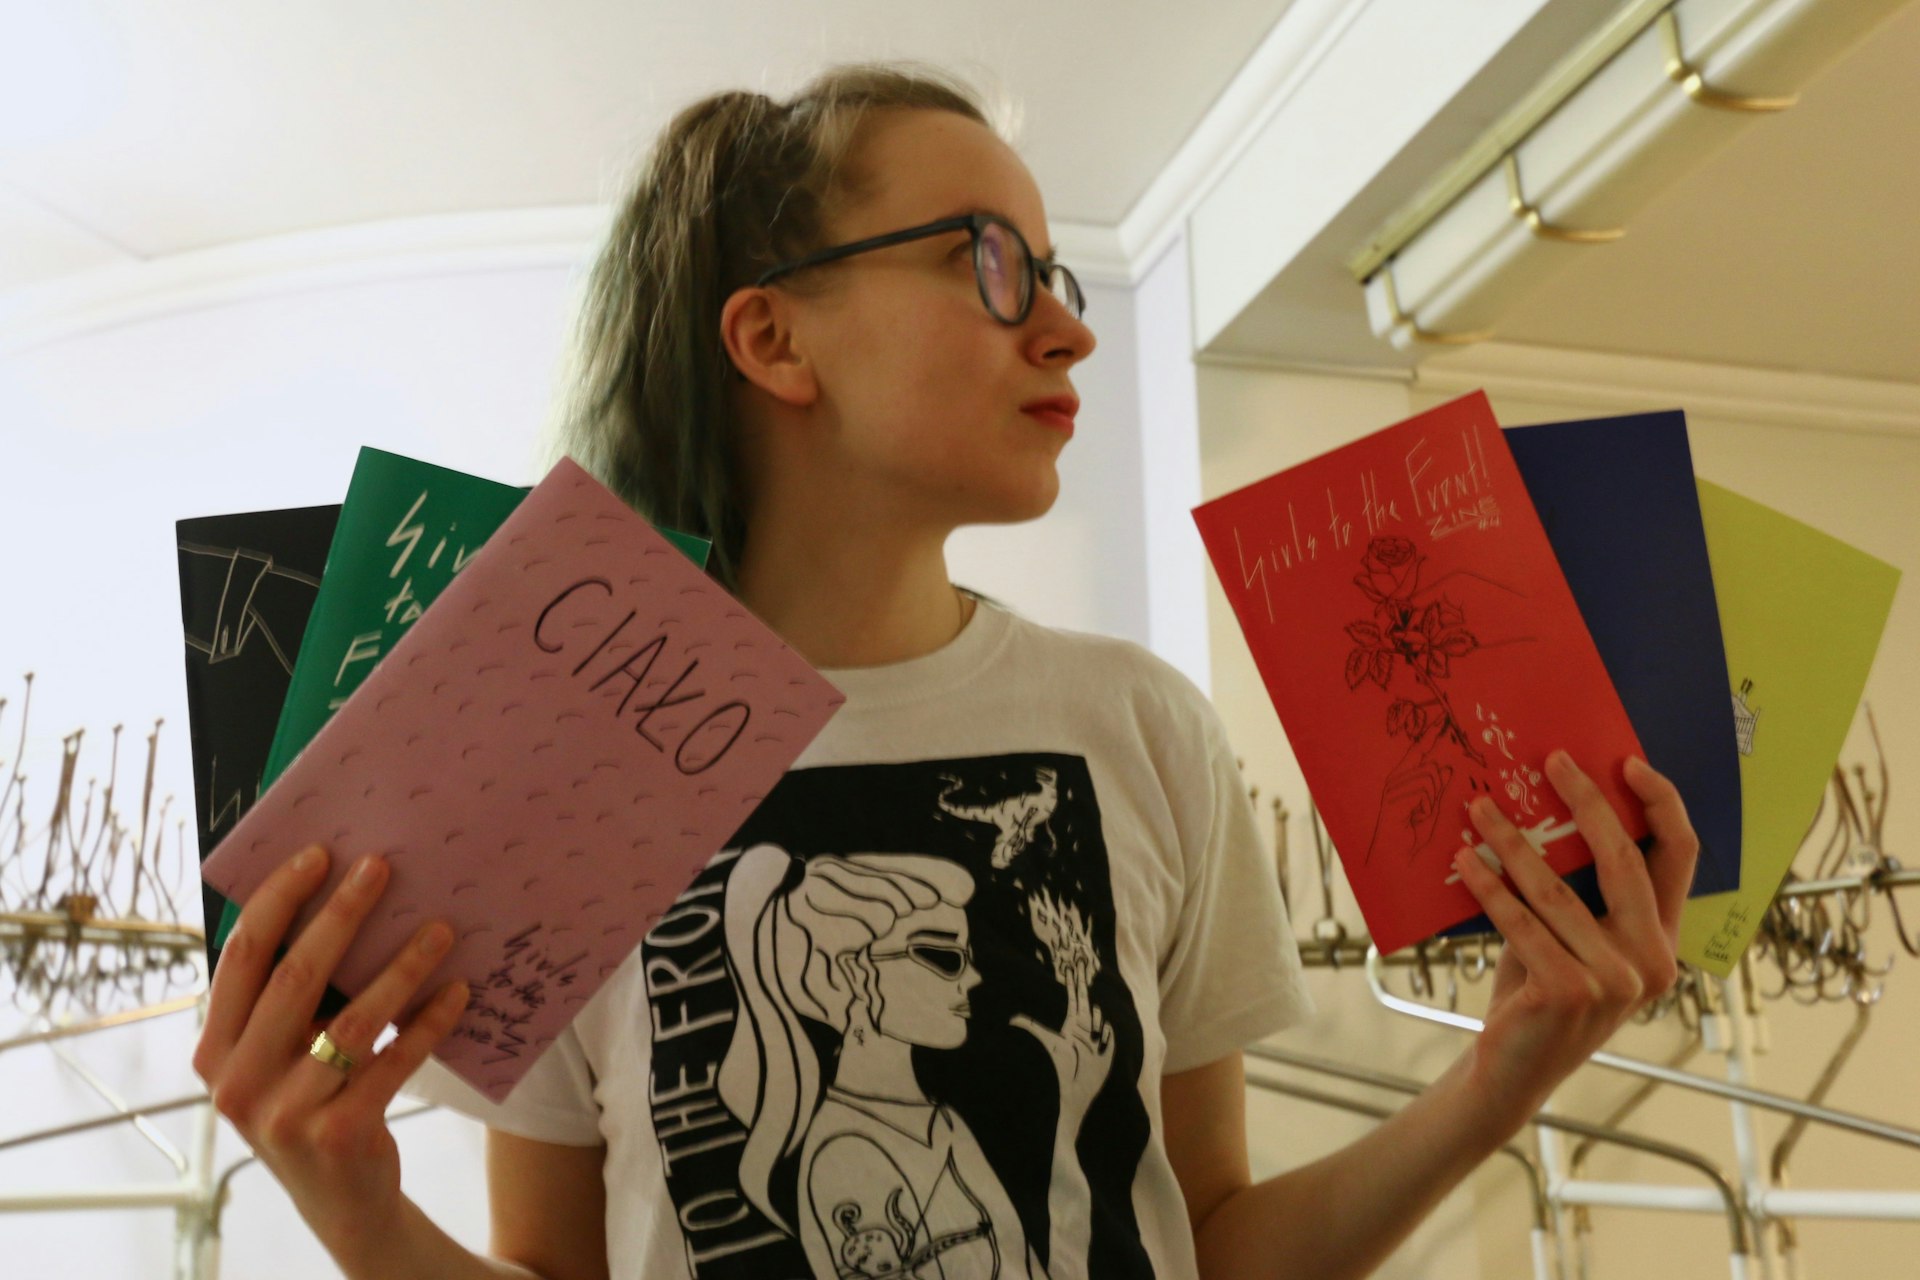 Ola Kamińska with the zine issues of Girls to the Front.